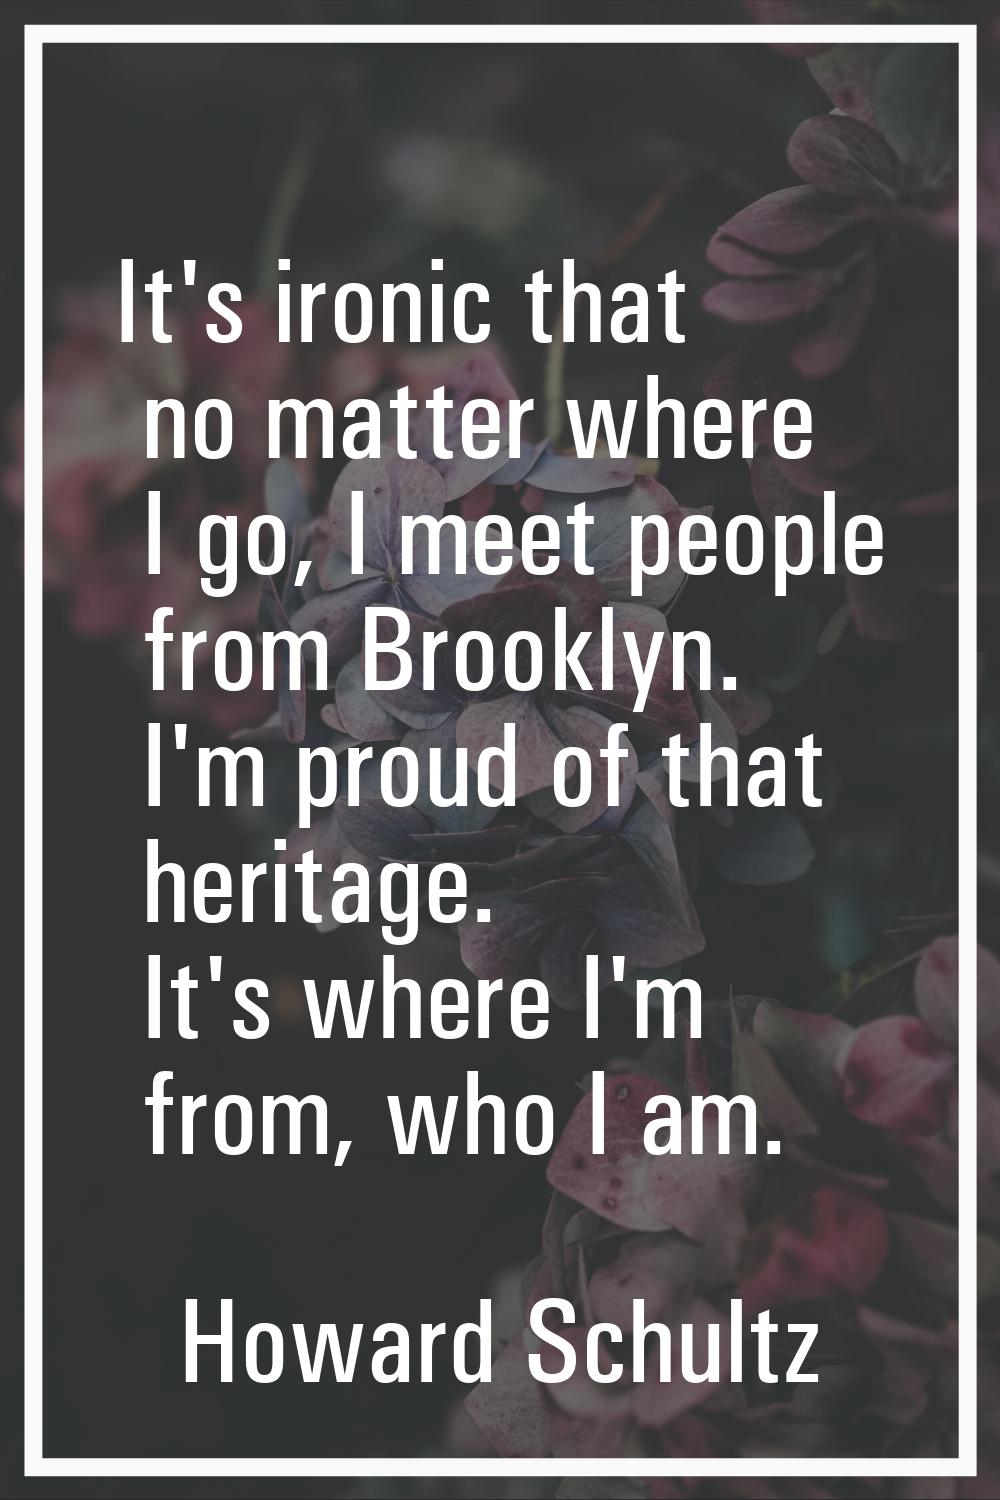 It's ironic that no matter where I go, I meet people from Brooklyn. I'm proud of that heritage. It'